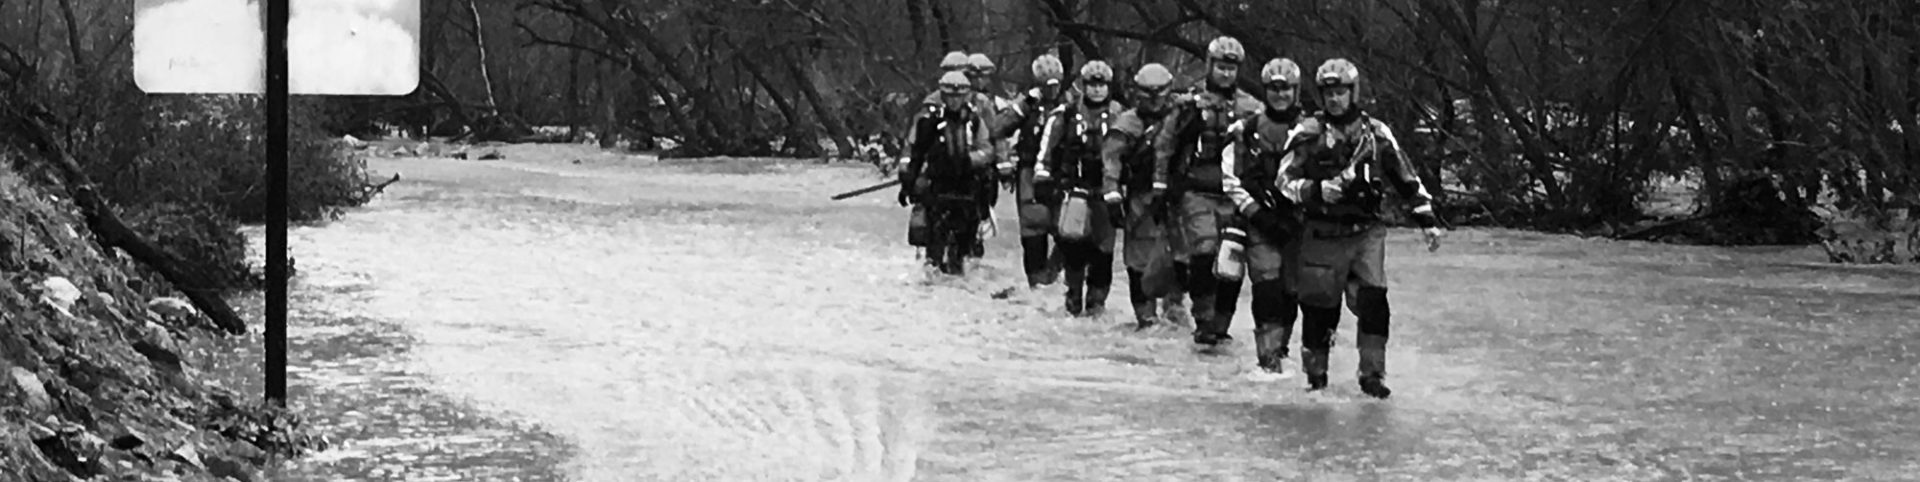 Row of firefighters walking through flooded street